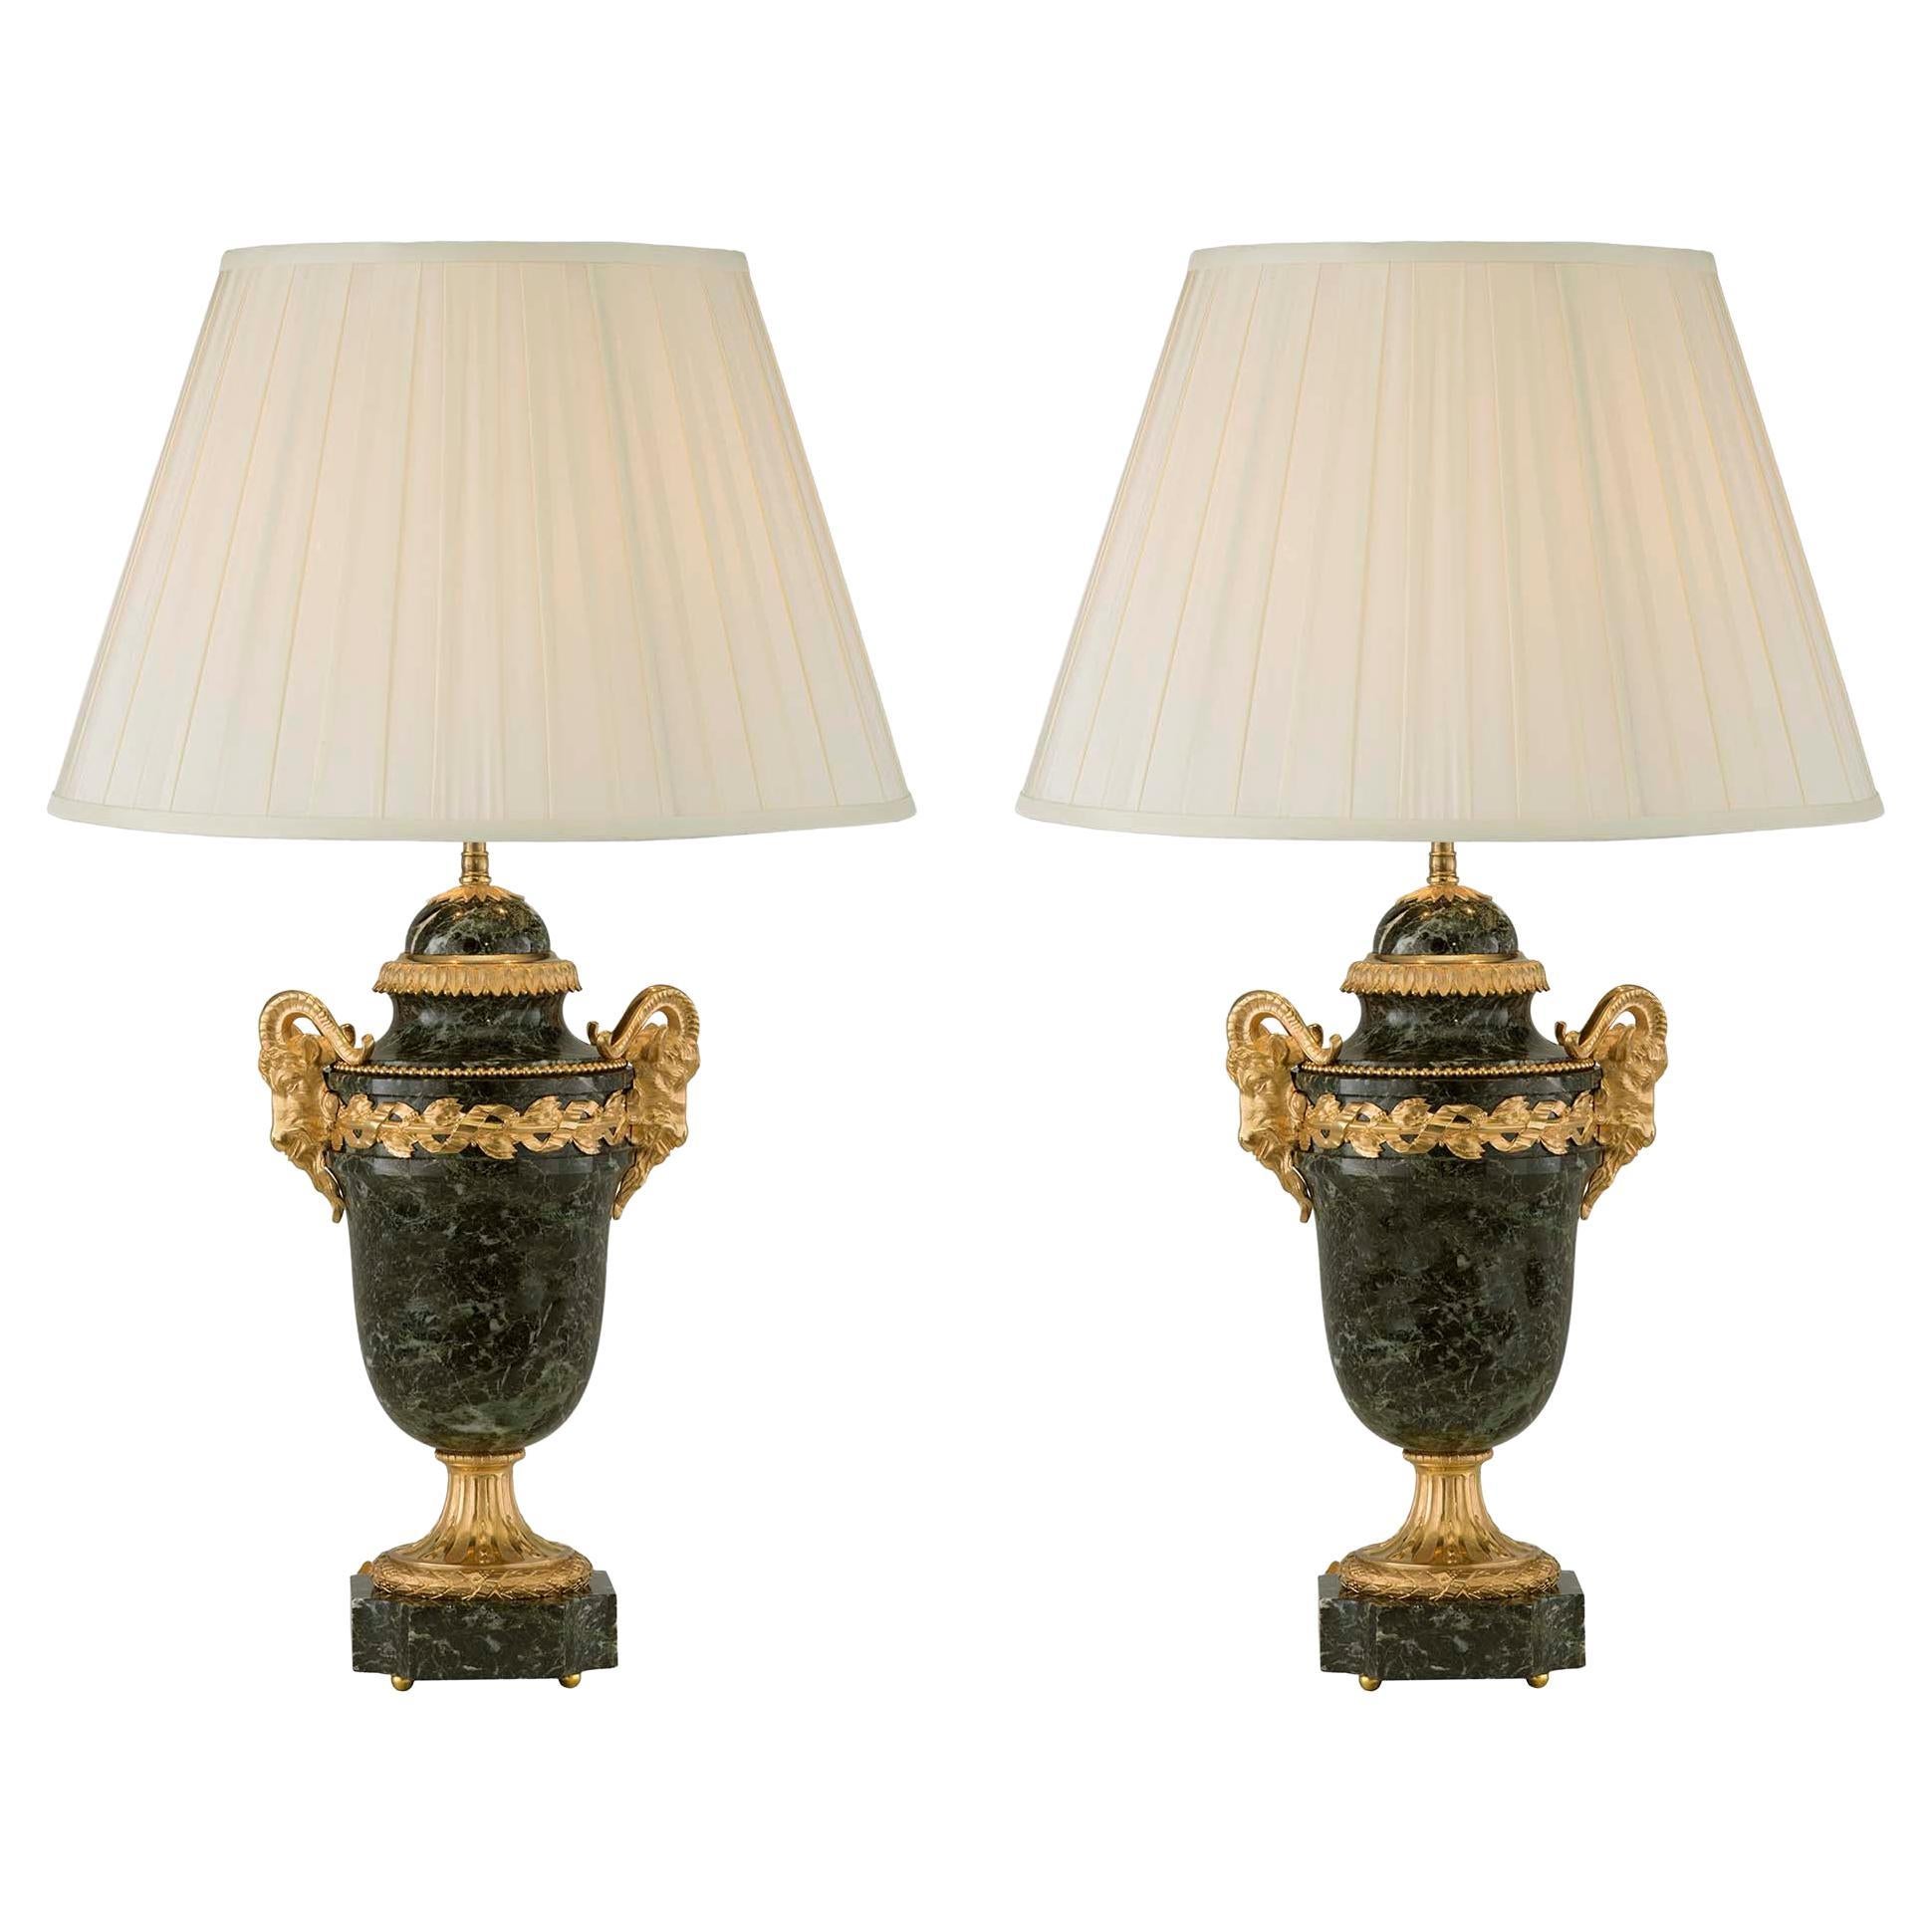 Pair of French 19th Century Louis XVI St. Ormolu and Vert Antique Marble Lamps